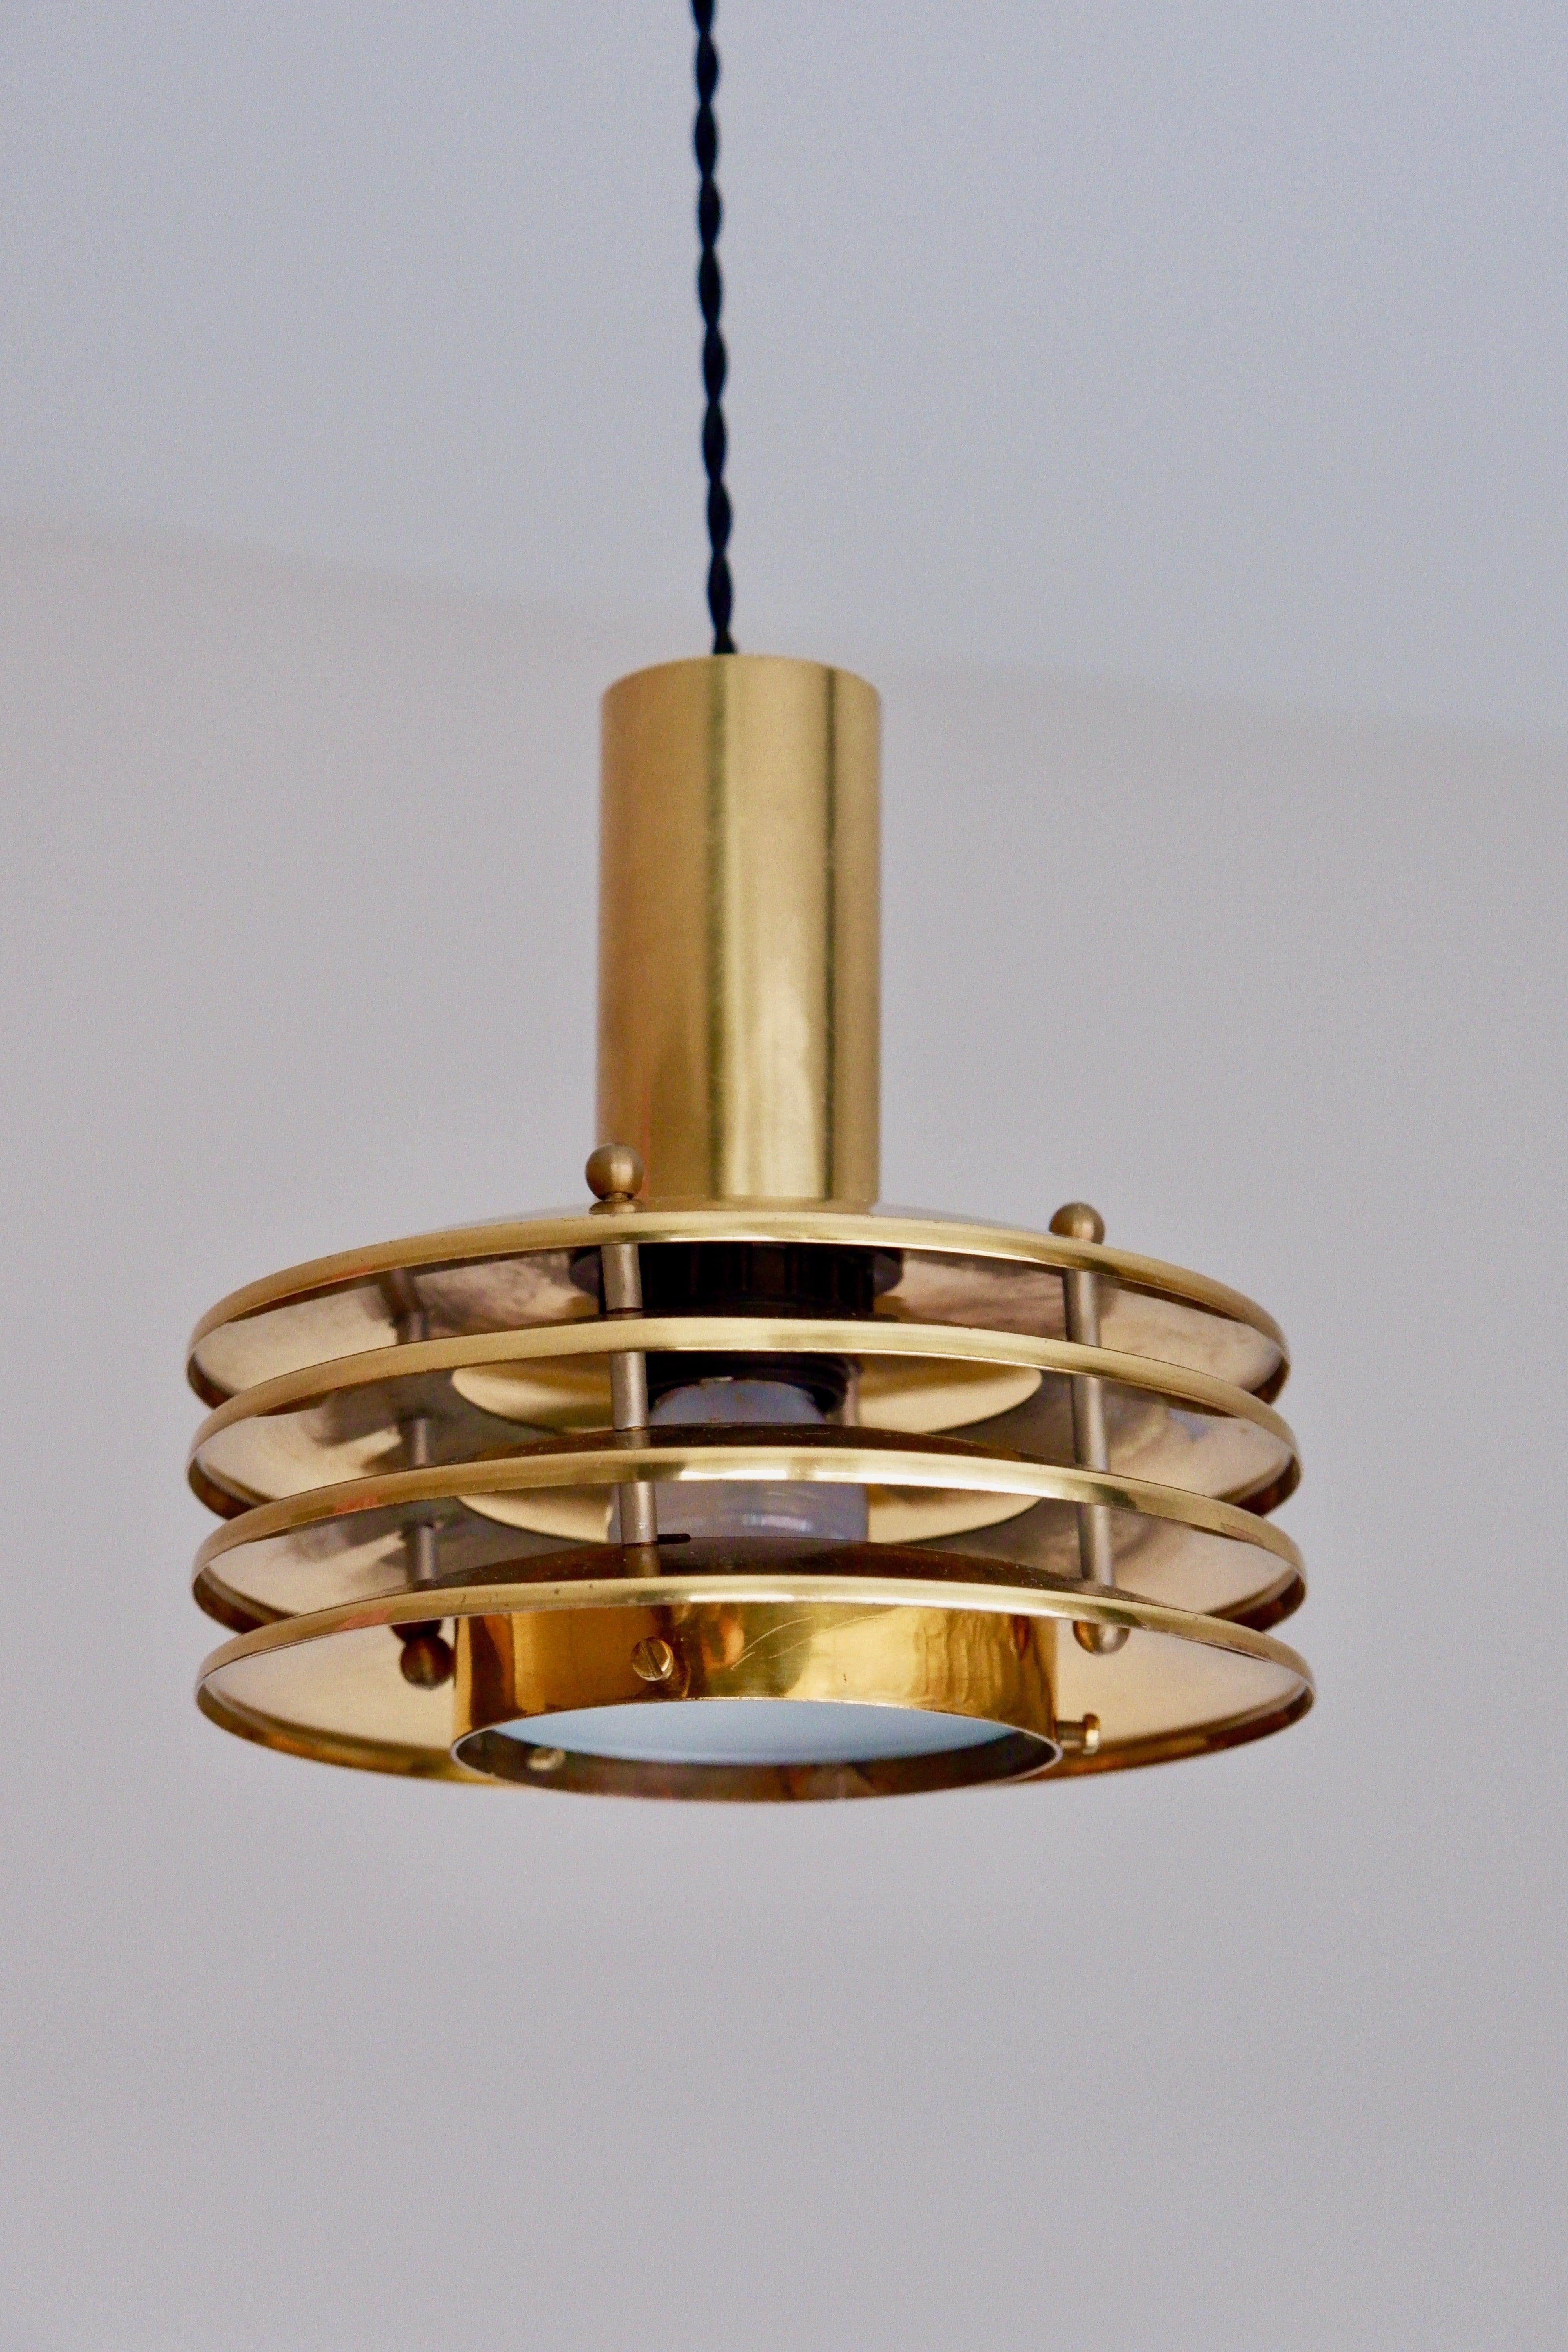 Ceiling light design by Kai Ruokonen. The design is typically Ruokonen style with the layers of brass shade. The lower part welcome a frosted glass on the bottom to hide the light.